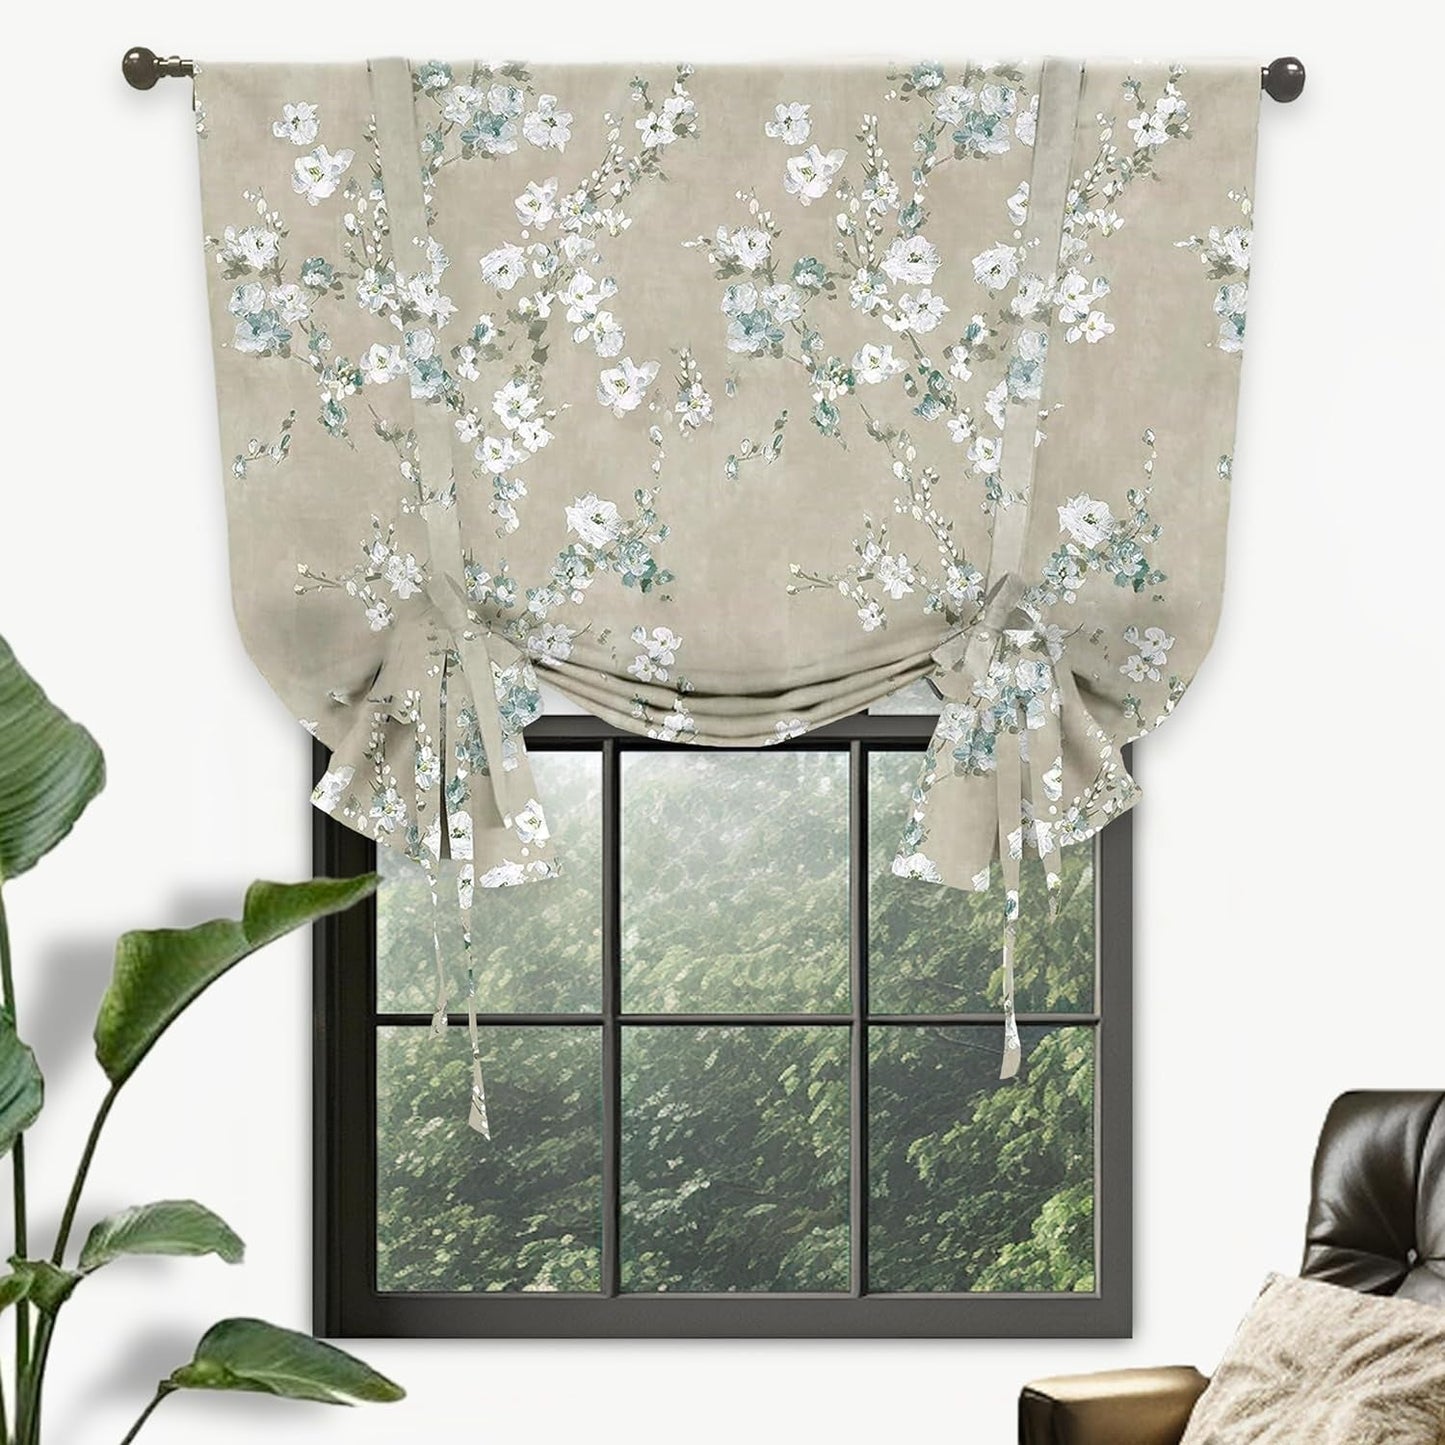 Driftaway Mackenzie Blossom Floral Pattern Tie up Curtain Room Darkening Thermal Insulated Window Curtain Adjustable Balloon Curtain for Small Window Rod Pocket 45 Inch by 63 Inch Blue Gray